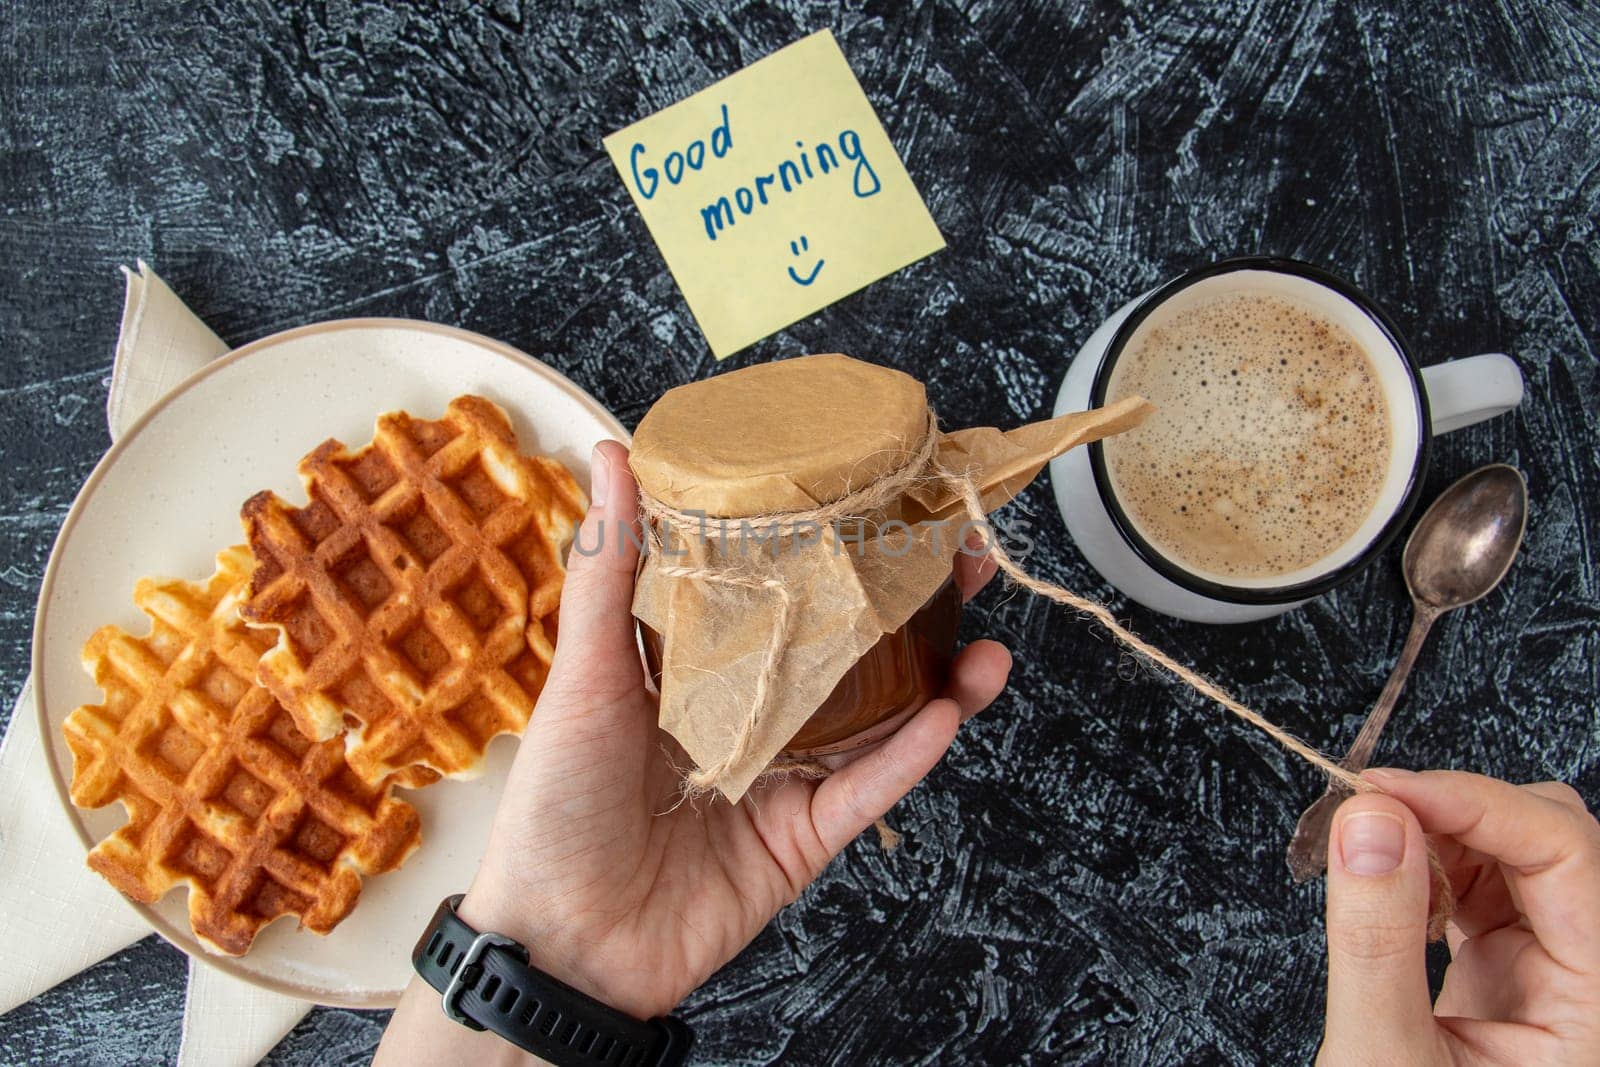 Top view of woman's hands holding a jar of homemade jam next to a cup of coffee and homemade Viennese waffles on a black textured background and a note Good morning. breakfast flat lay